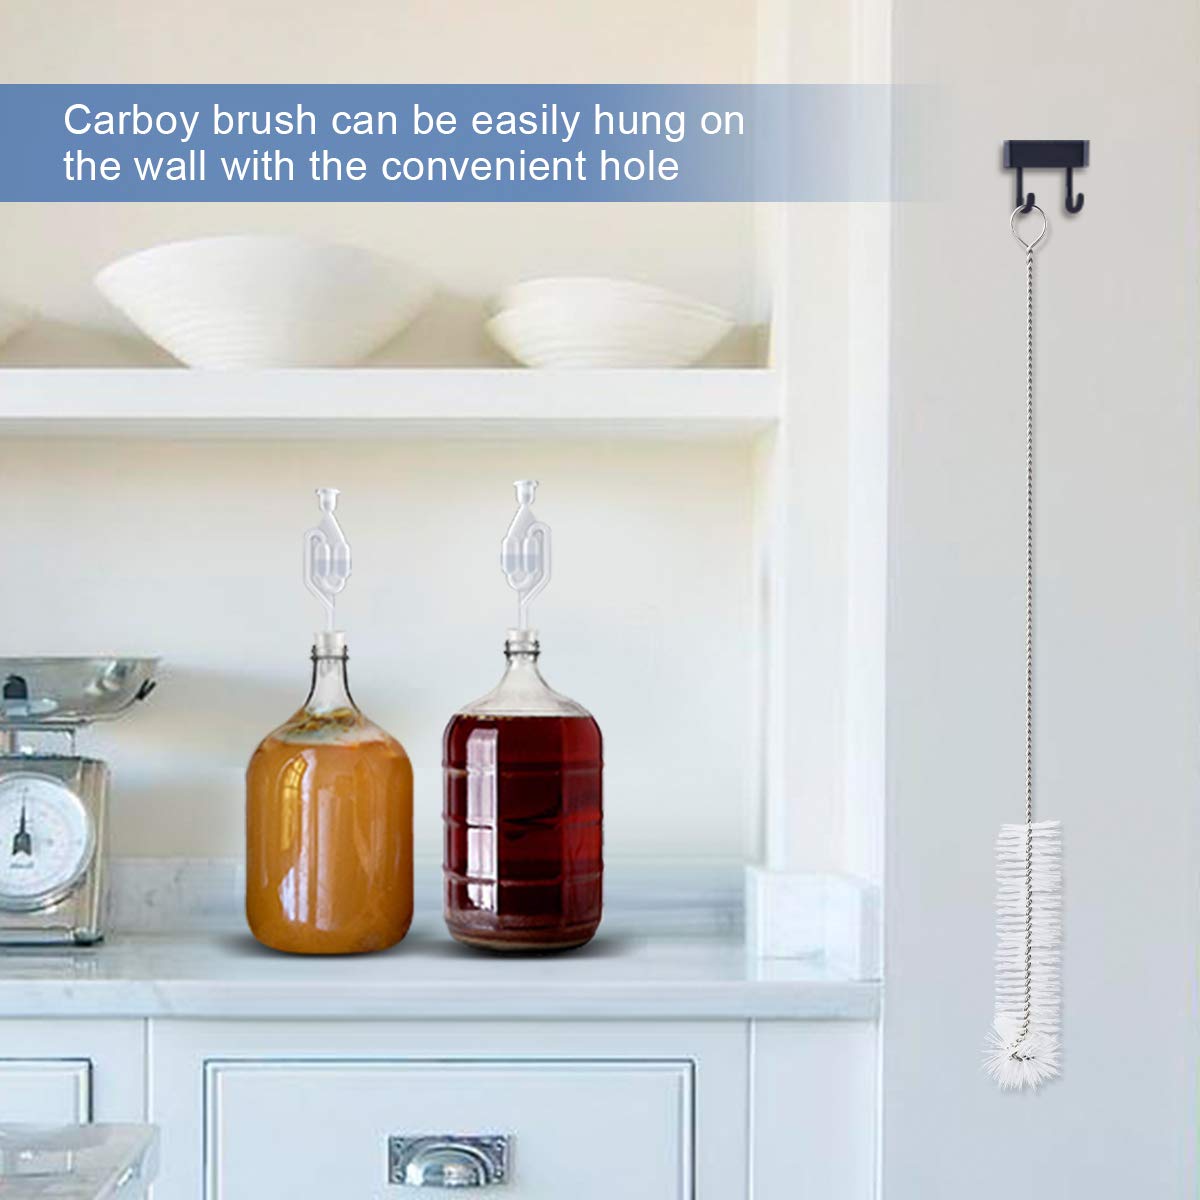 Carboy brush can be easily hung on the wall with the convenient hole